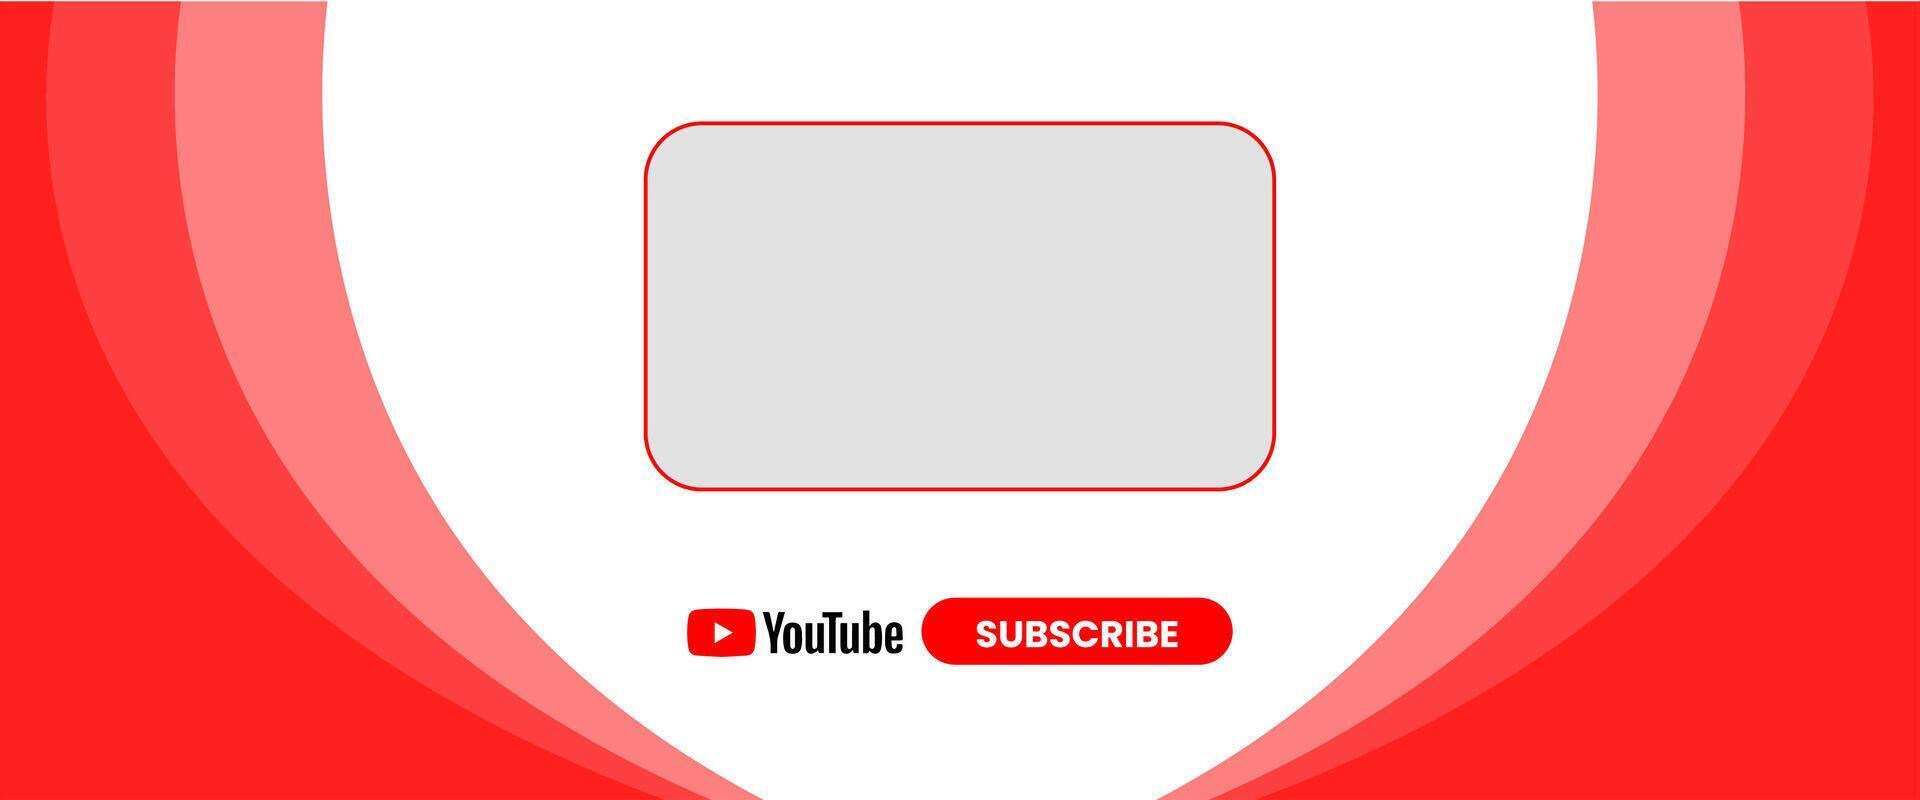 Youtube Channel Cover Wireframe. Youtube Banner For Design Your Channel. Youtube Channel Name Lower Third vector